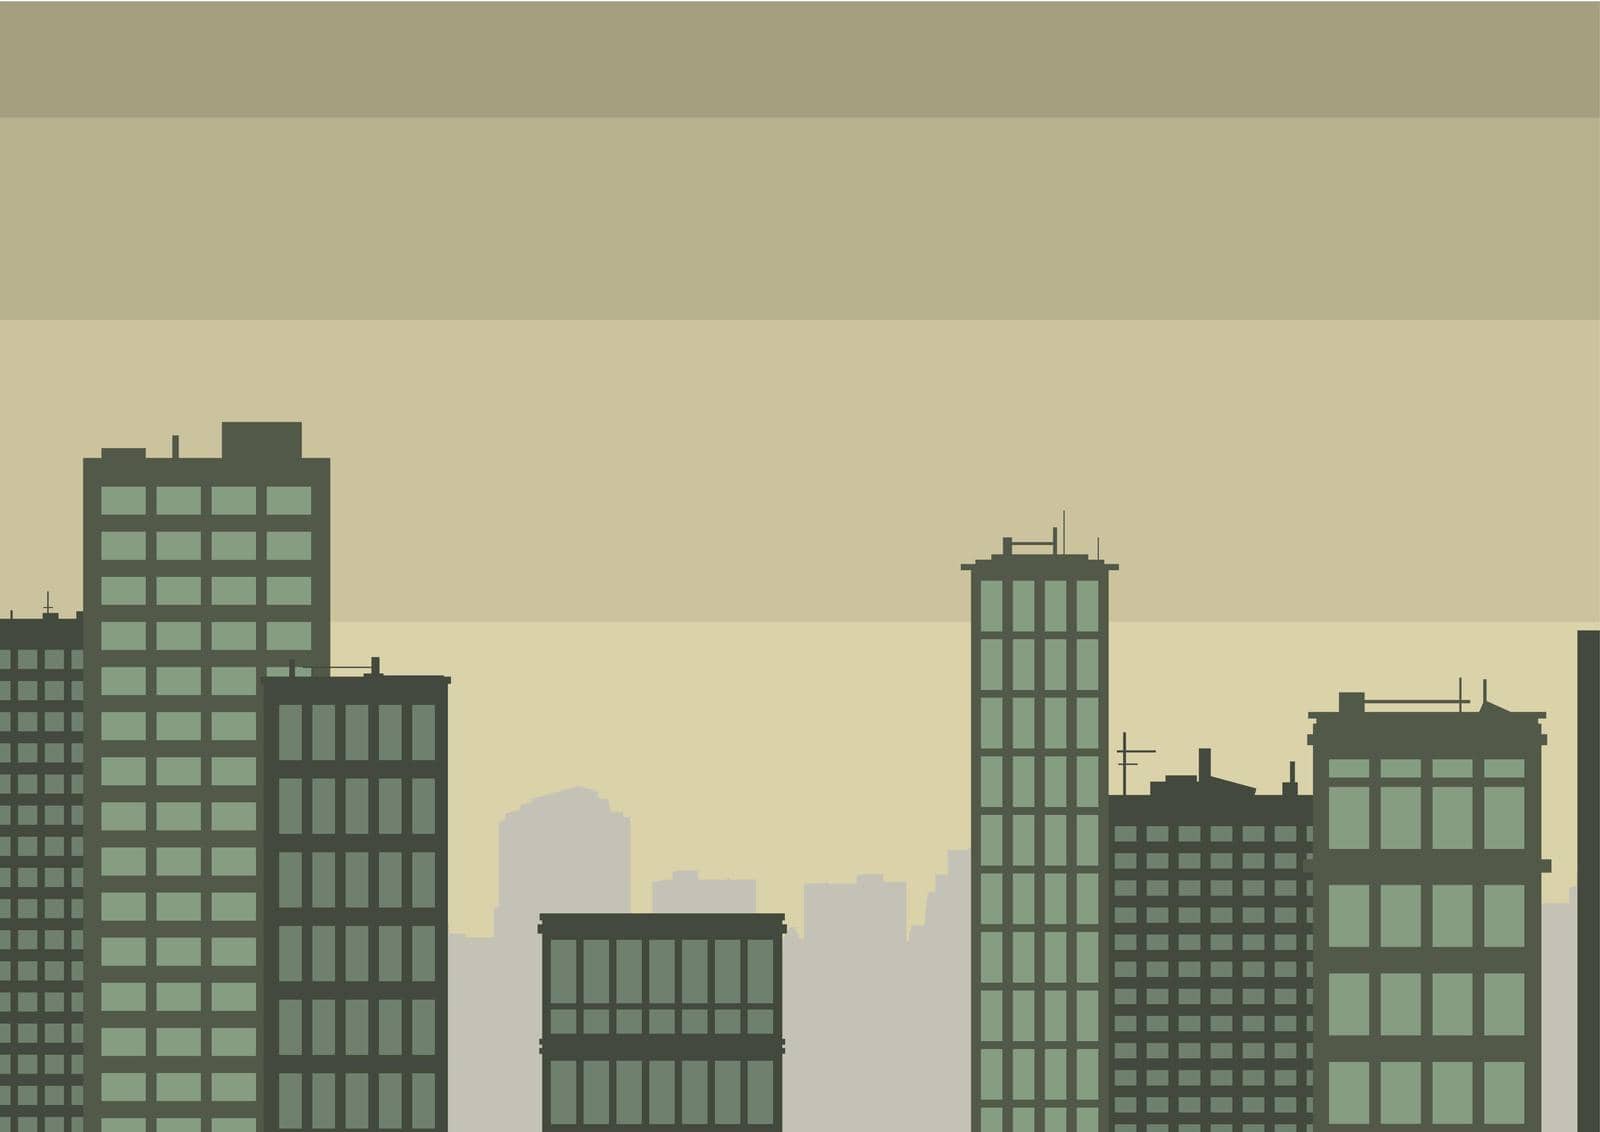 Multiple Skyscrapers Drawing Showing City Skyline.